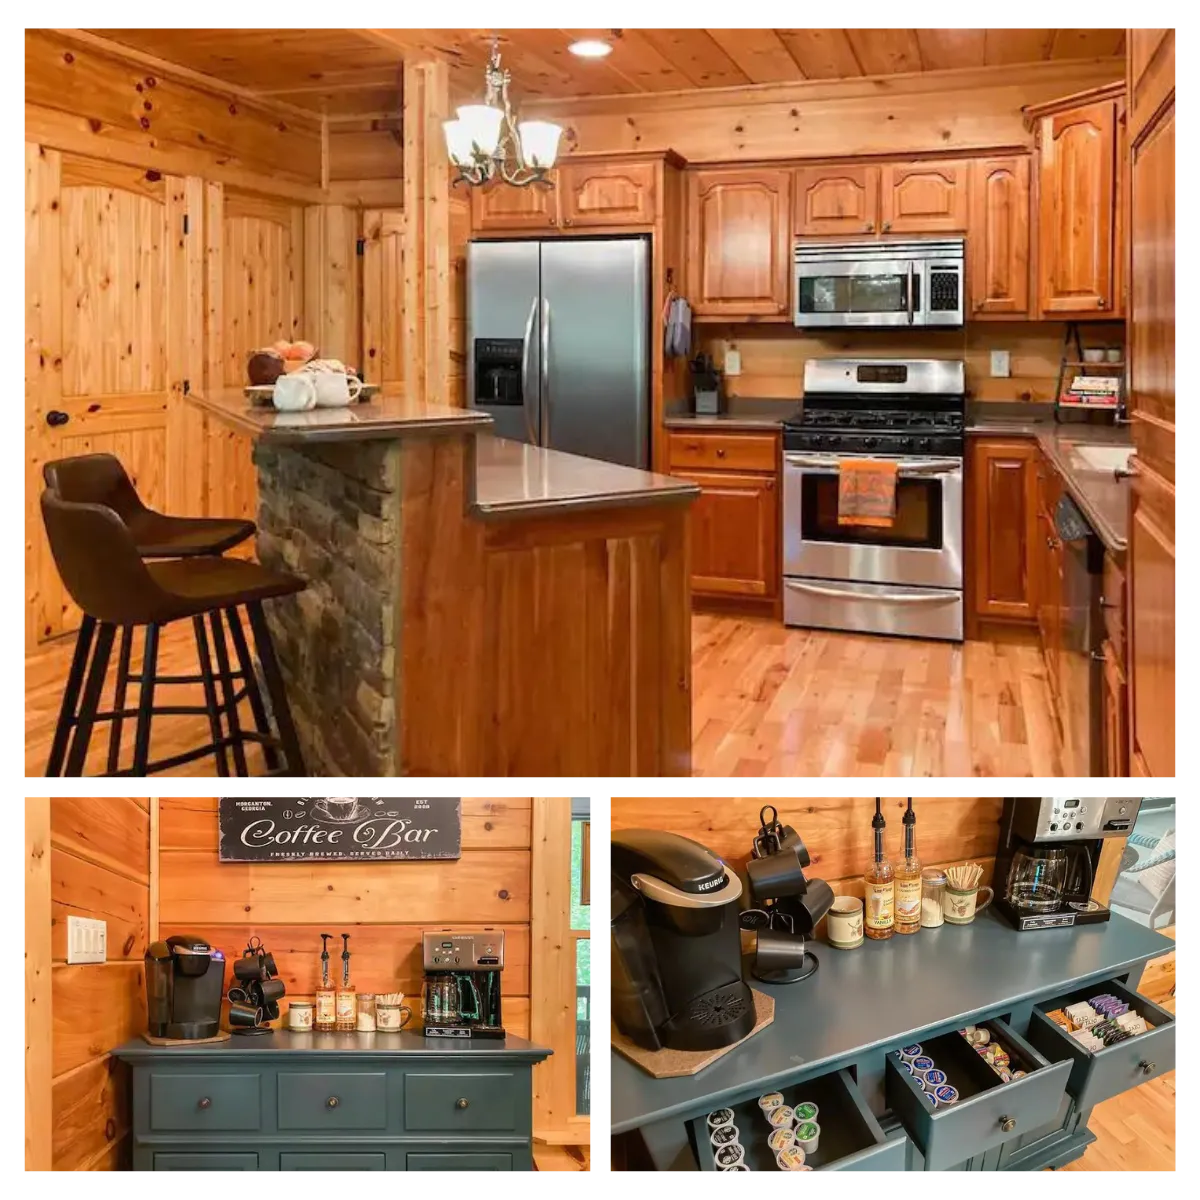 Blissful Getaway: Enjoy a modern kitchen, cozy coffee spot, rustic dining area, forest views, and a delightful space for cooking.